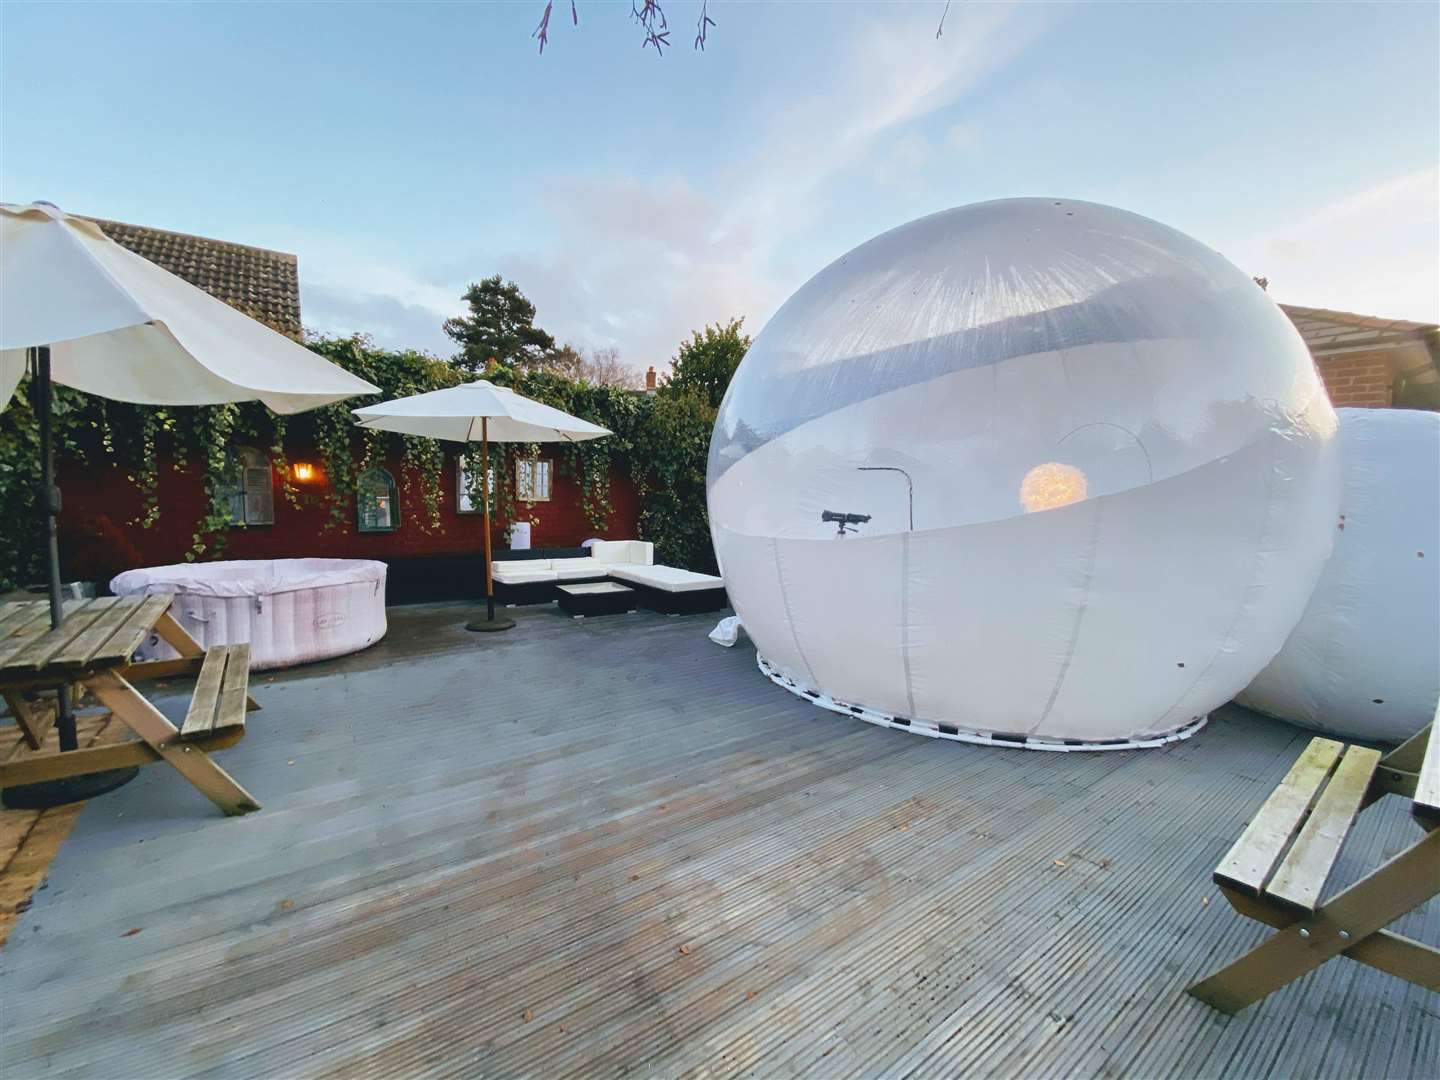 People staying the pod will also have access to a hot tub and a private decking area